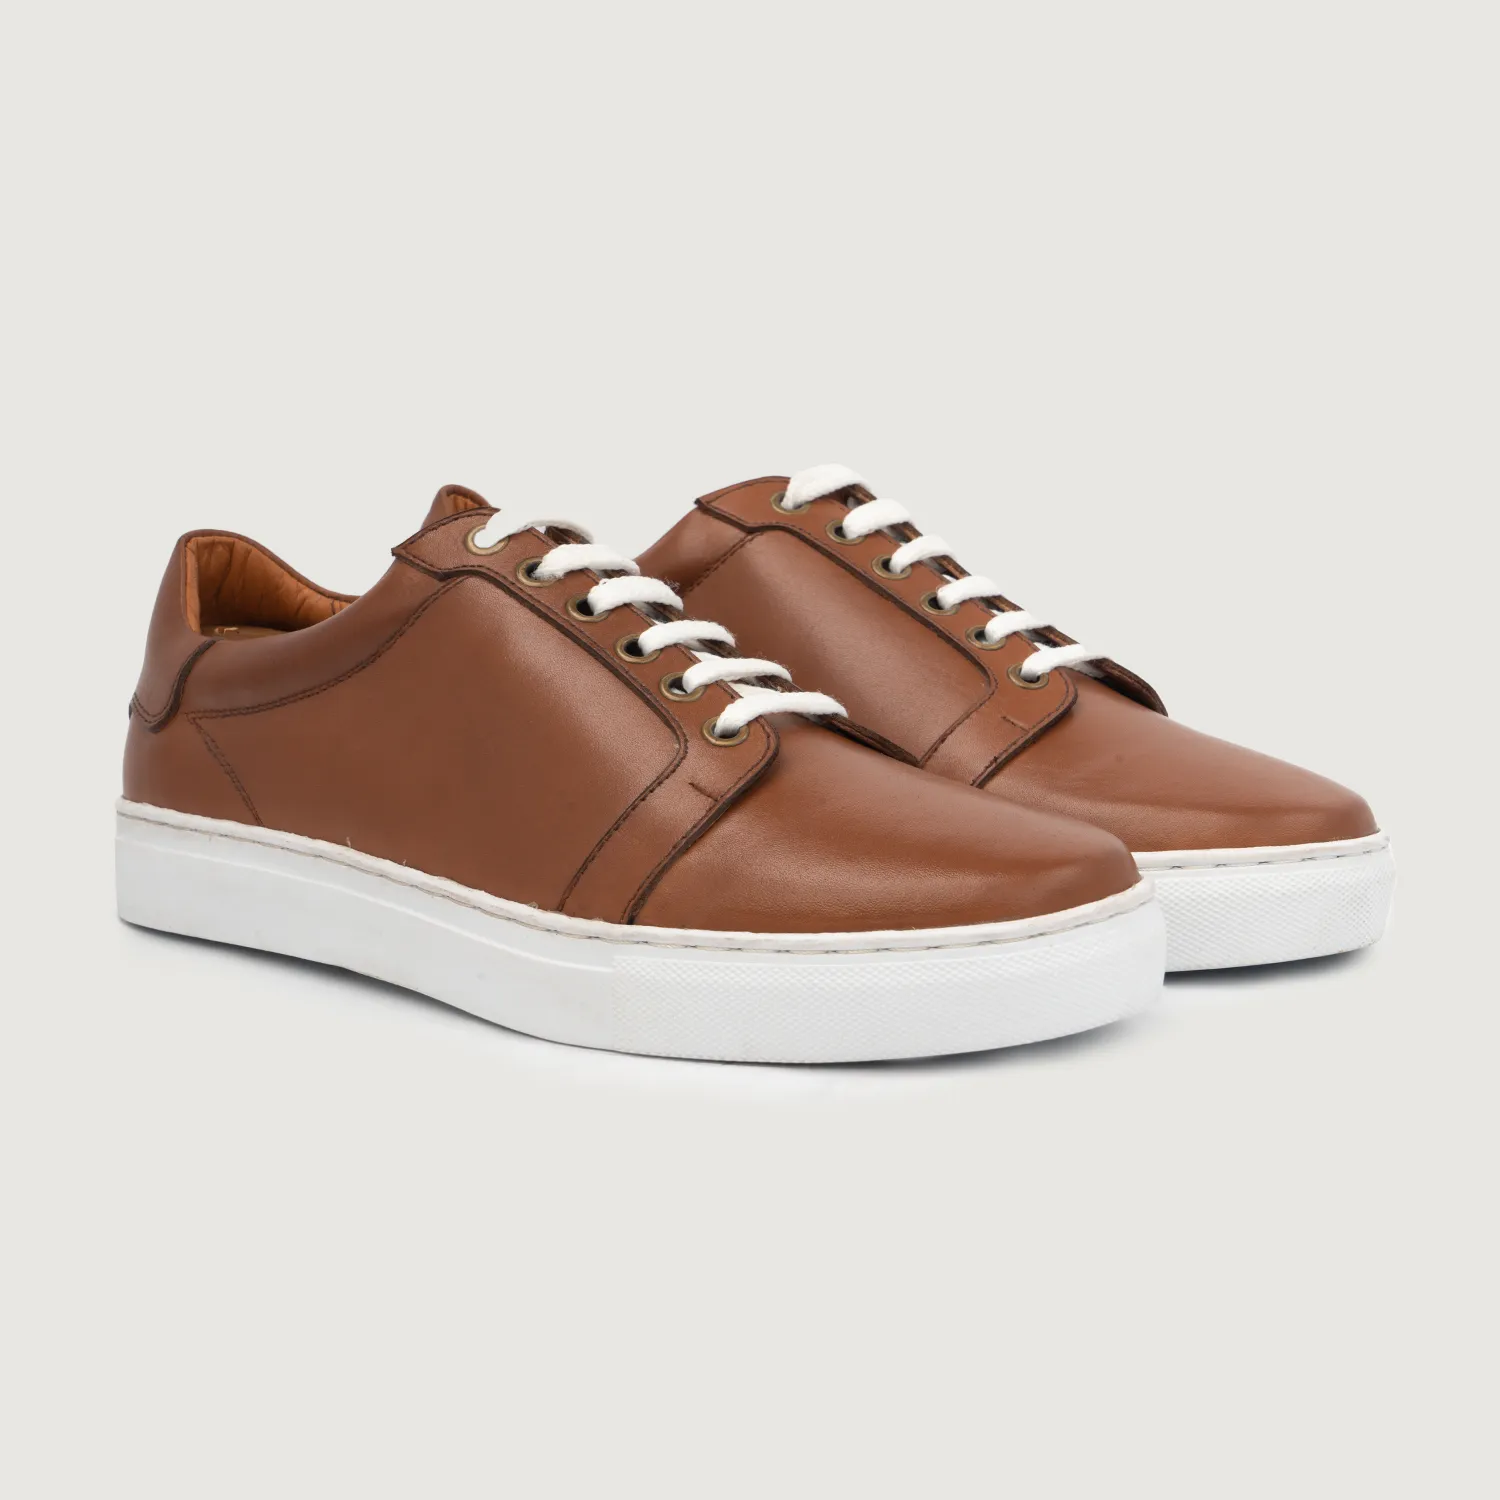 Men’s Leather Sneakers